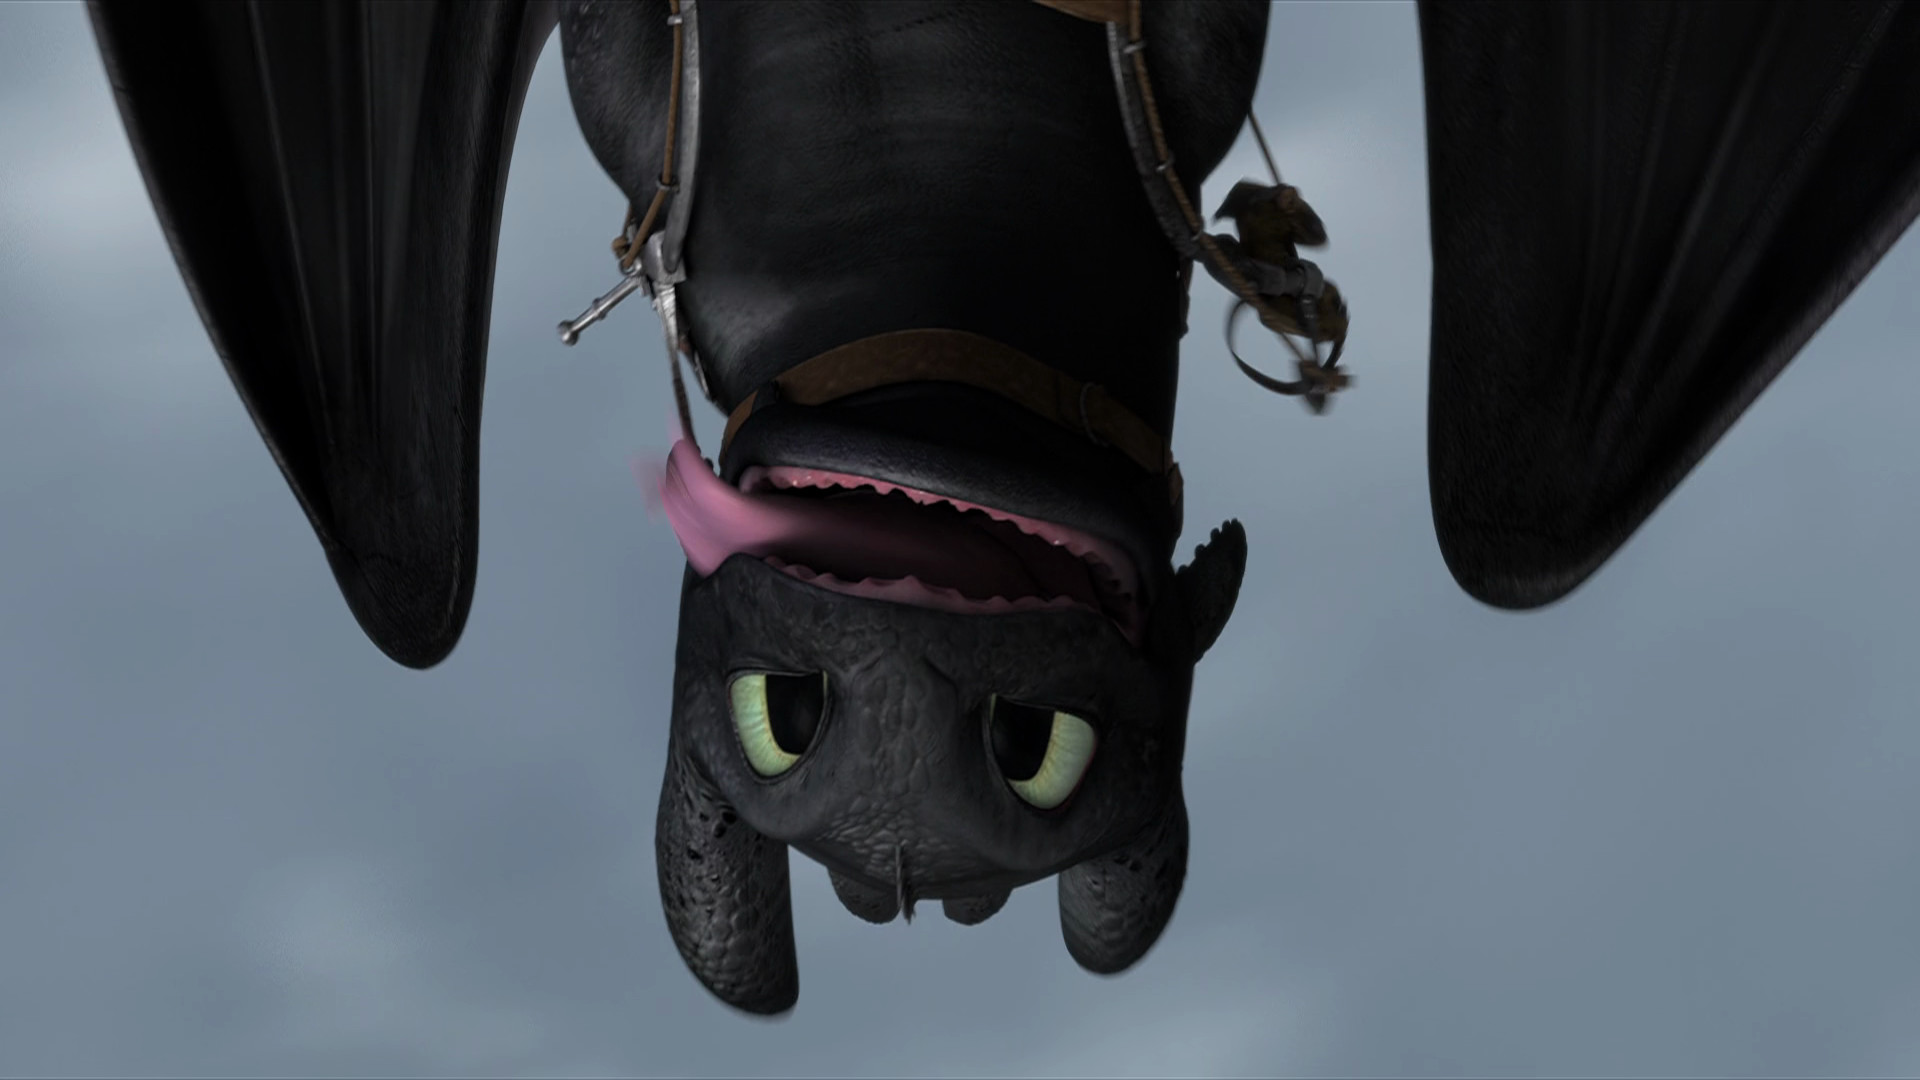 Movie How To Train Your Dragon 2 Toothless How To Train Your Dragon 1920x1080